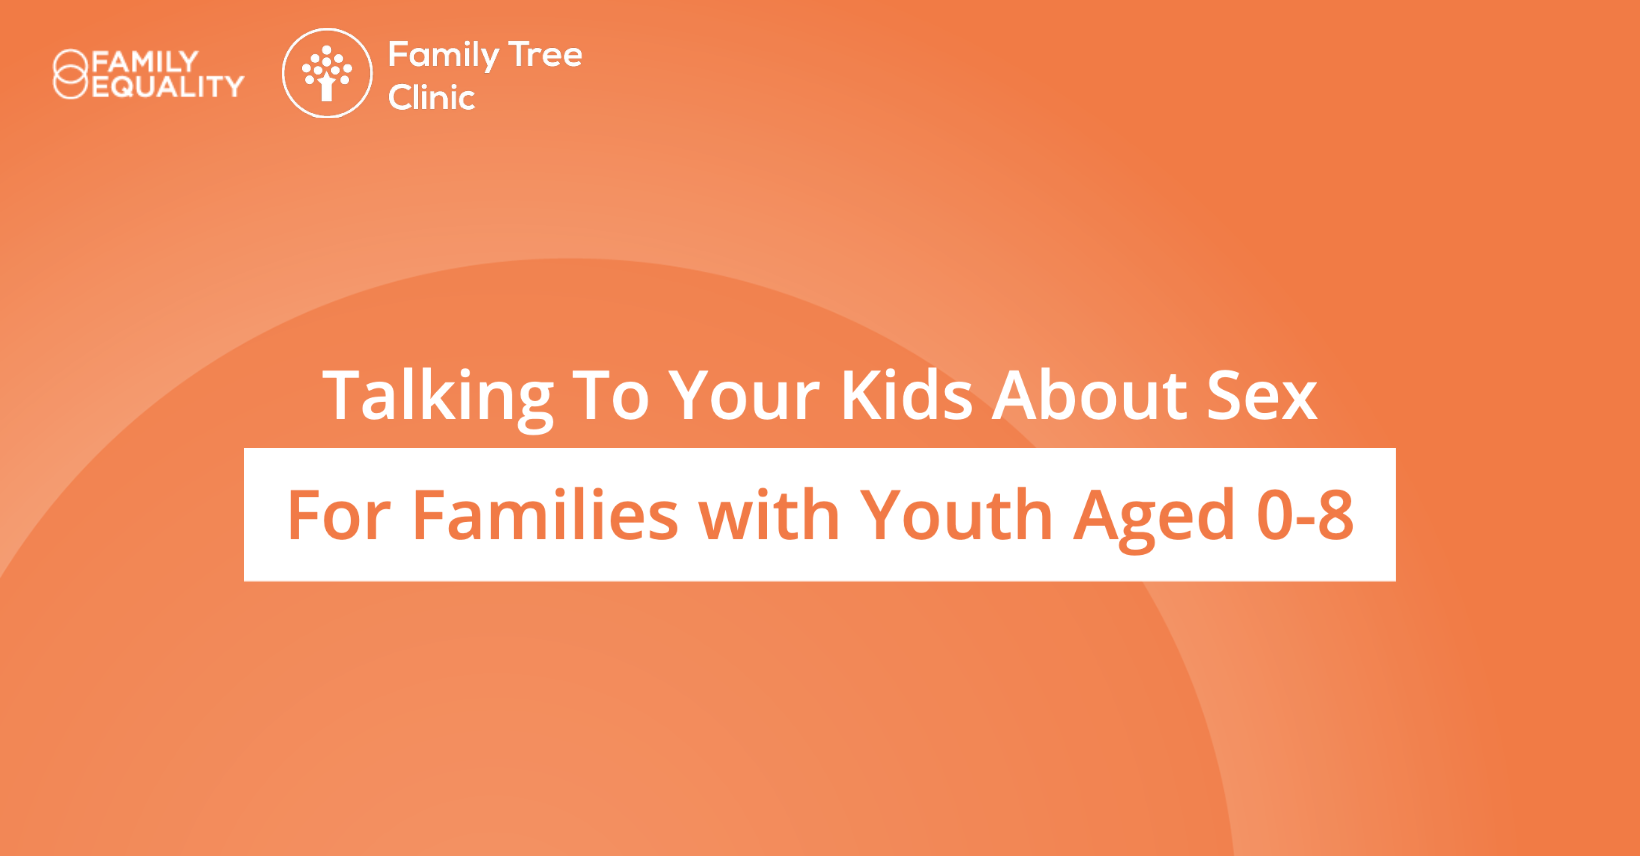 Talking to Your Kids About Sex for Families with Youth Ages 0-8